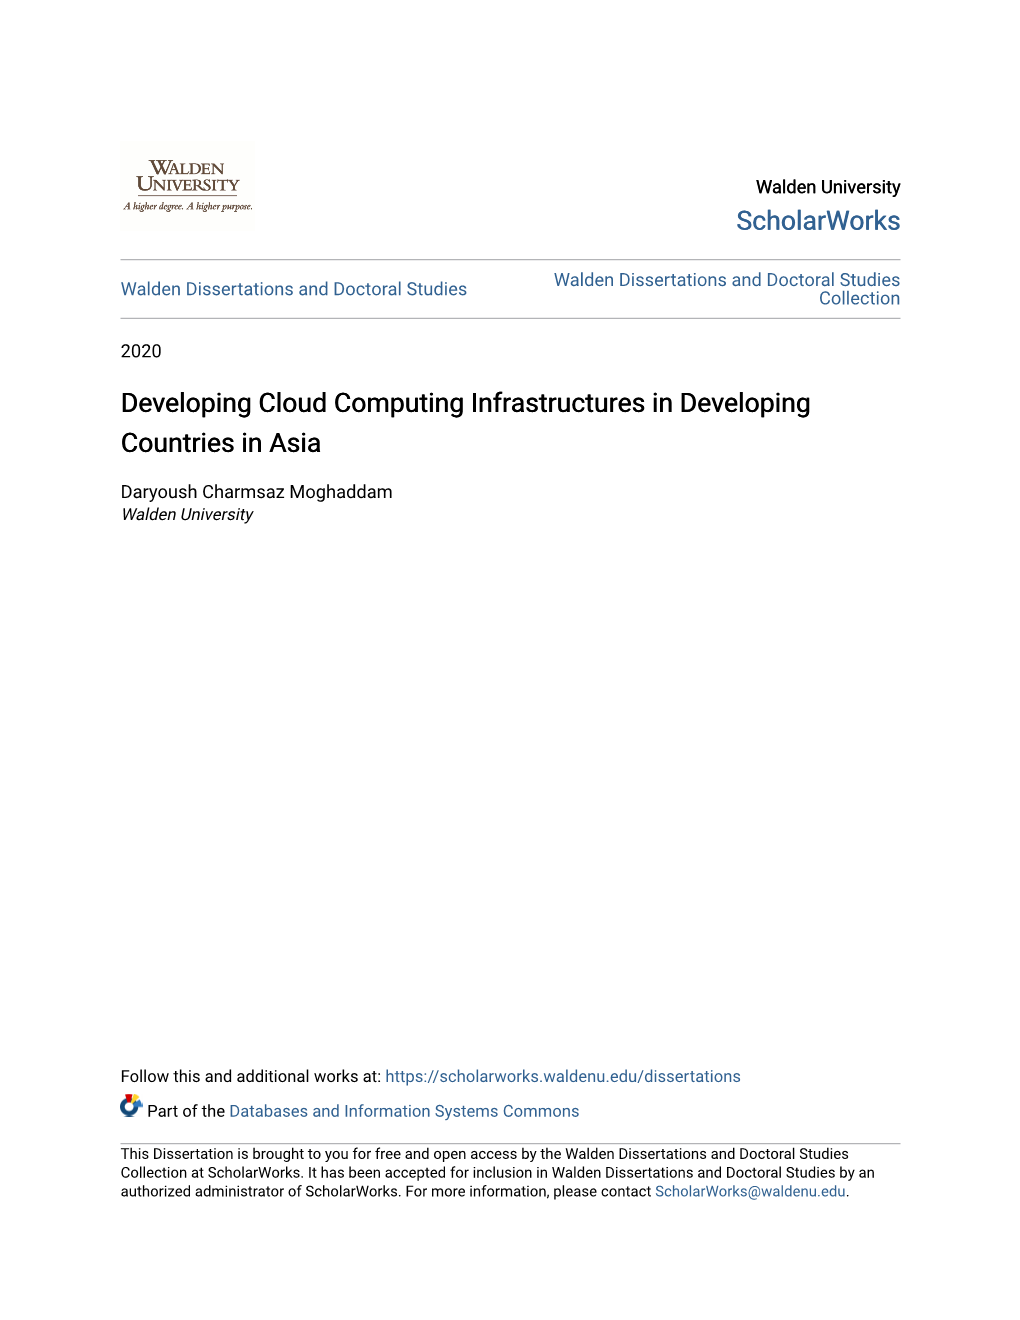 Developing Cloud Computing Infrastructures in Developing Countries in Asia